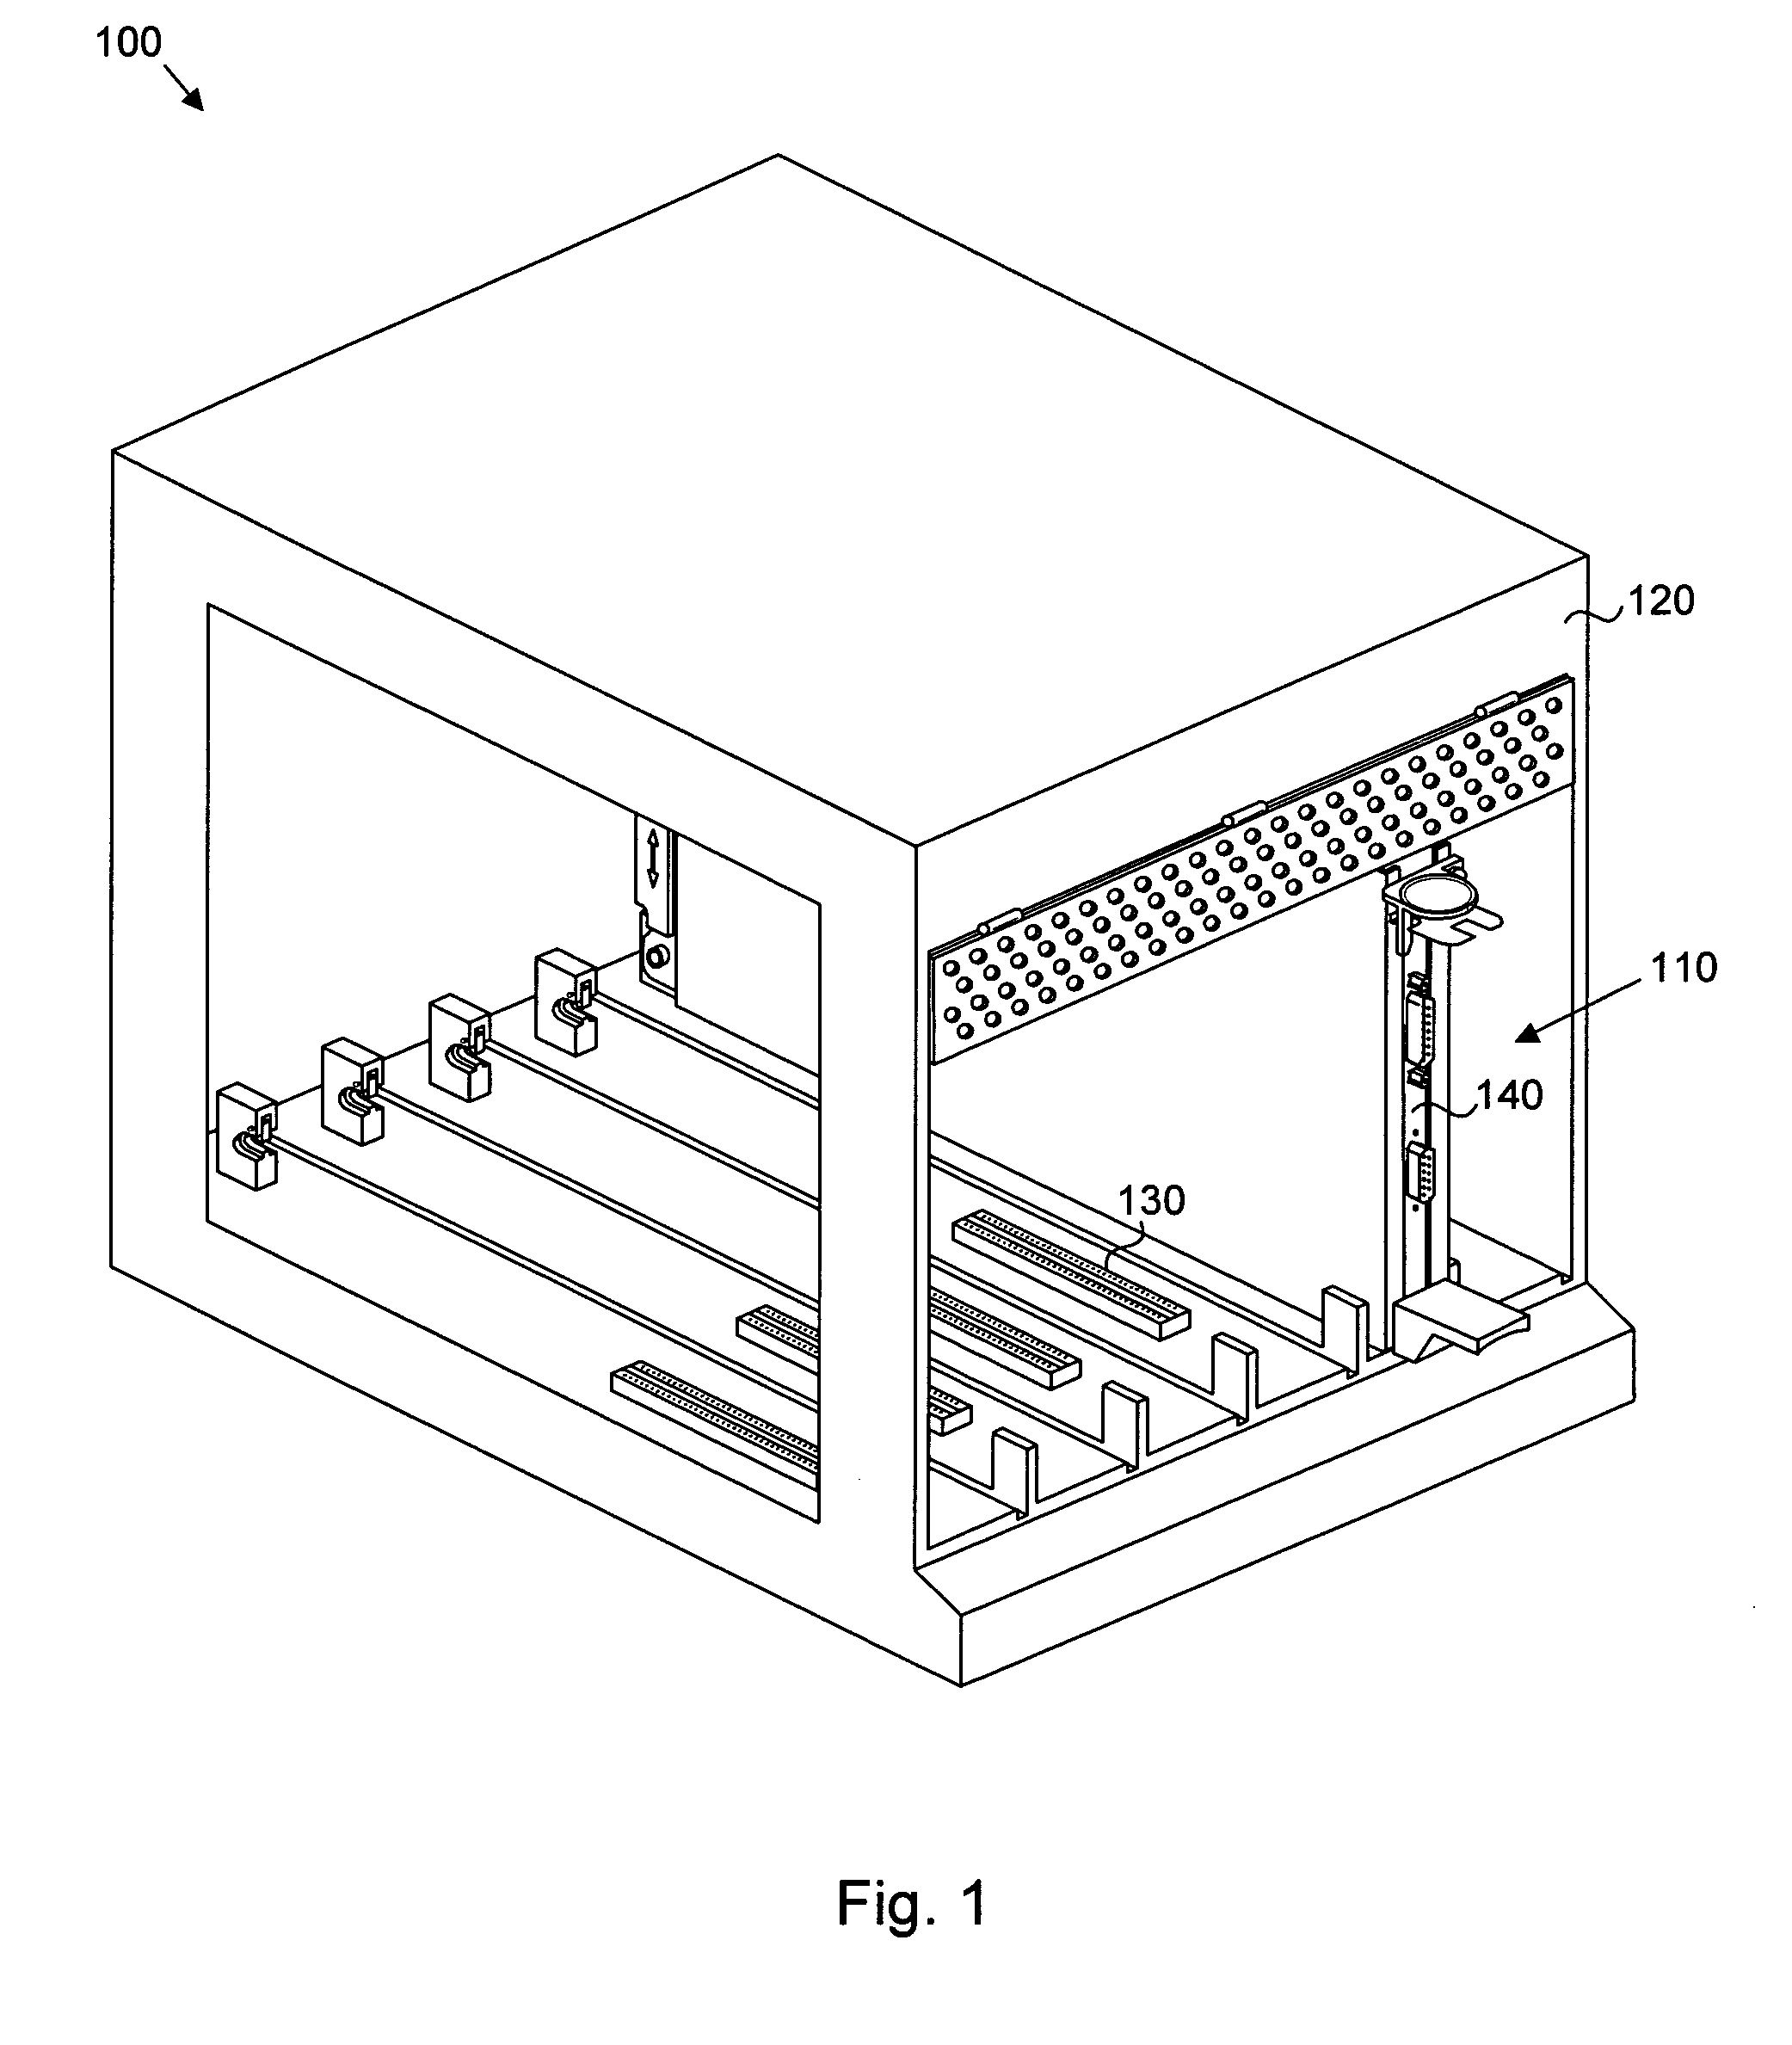 Apparatus, system, and method for toolless installation and removal of an expansion card